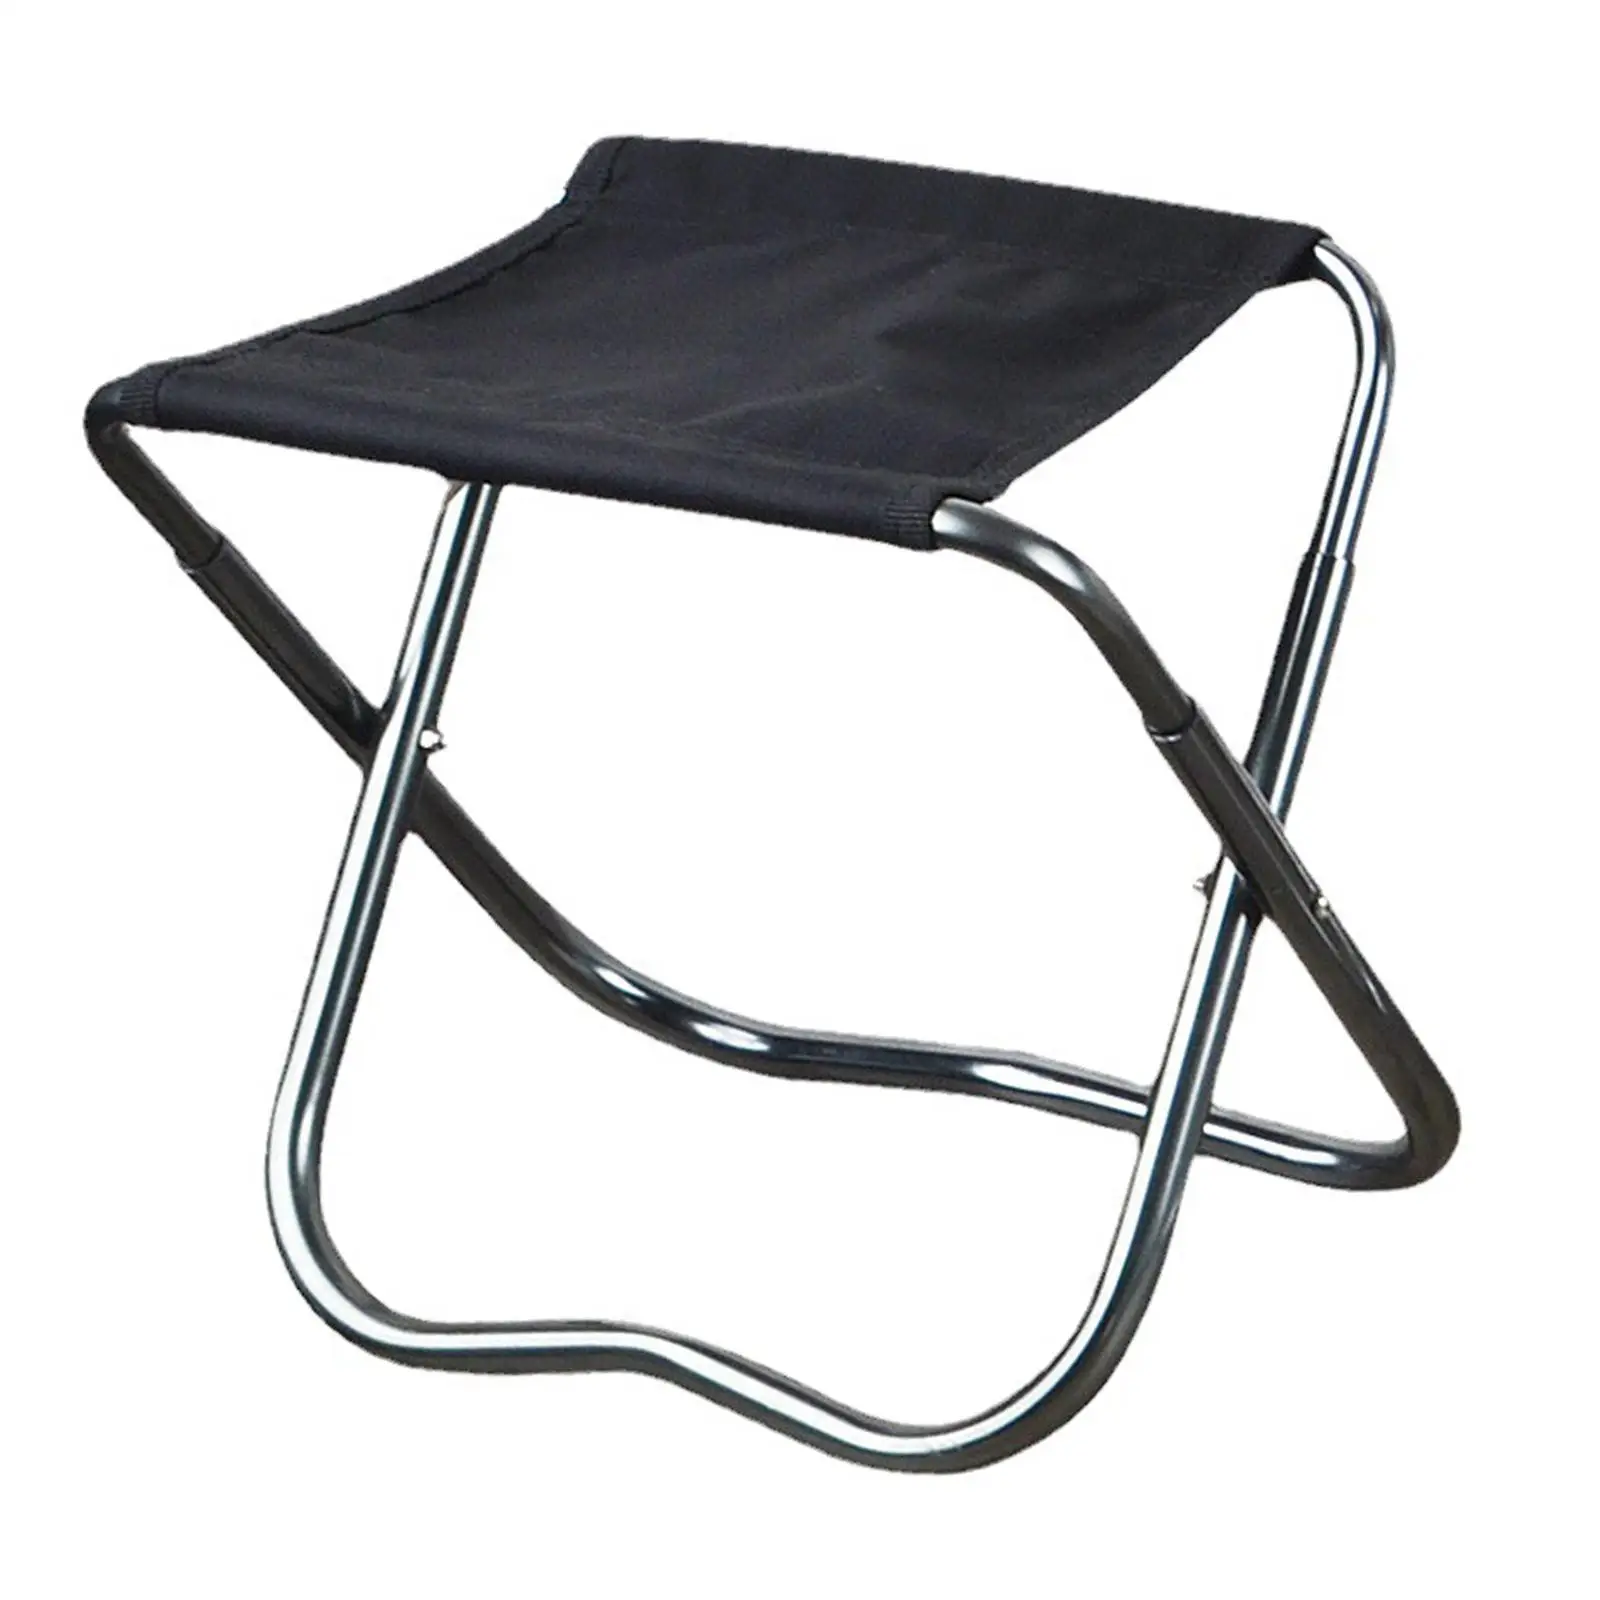 Camping Chair Collapsible Easy to Carry Fishing Seat for Camping Lawn Picnic